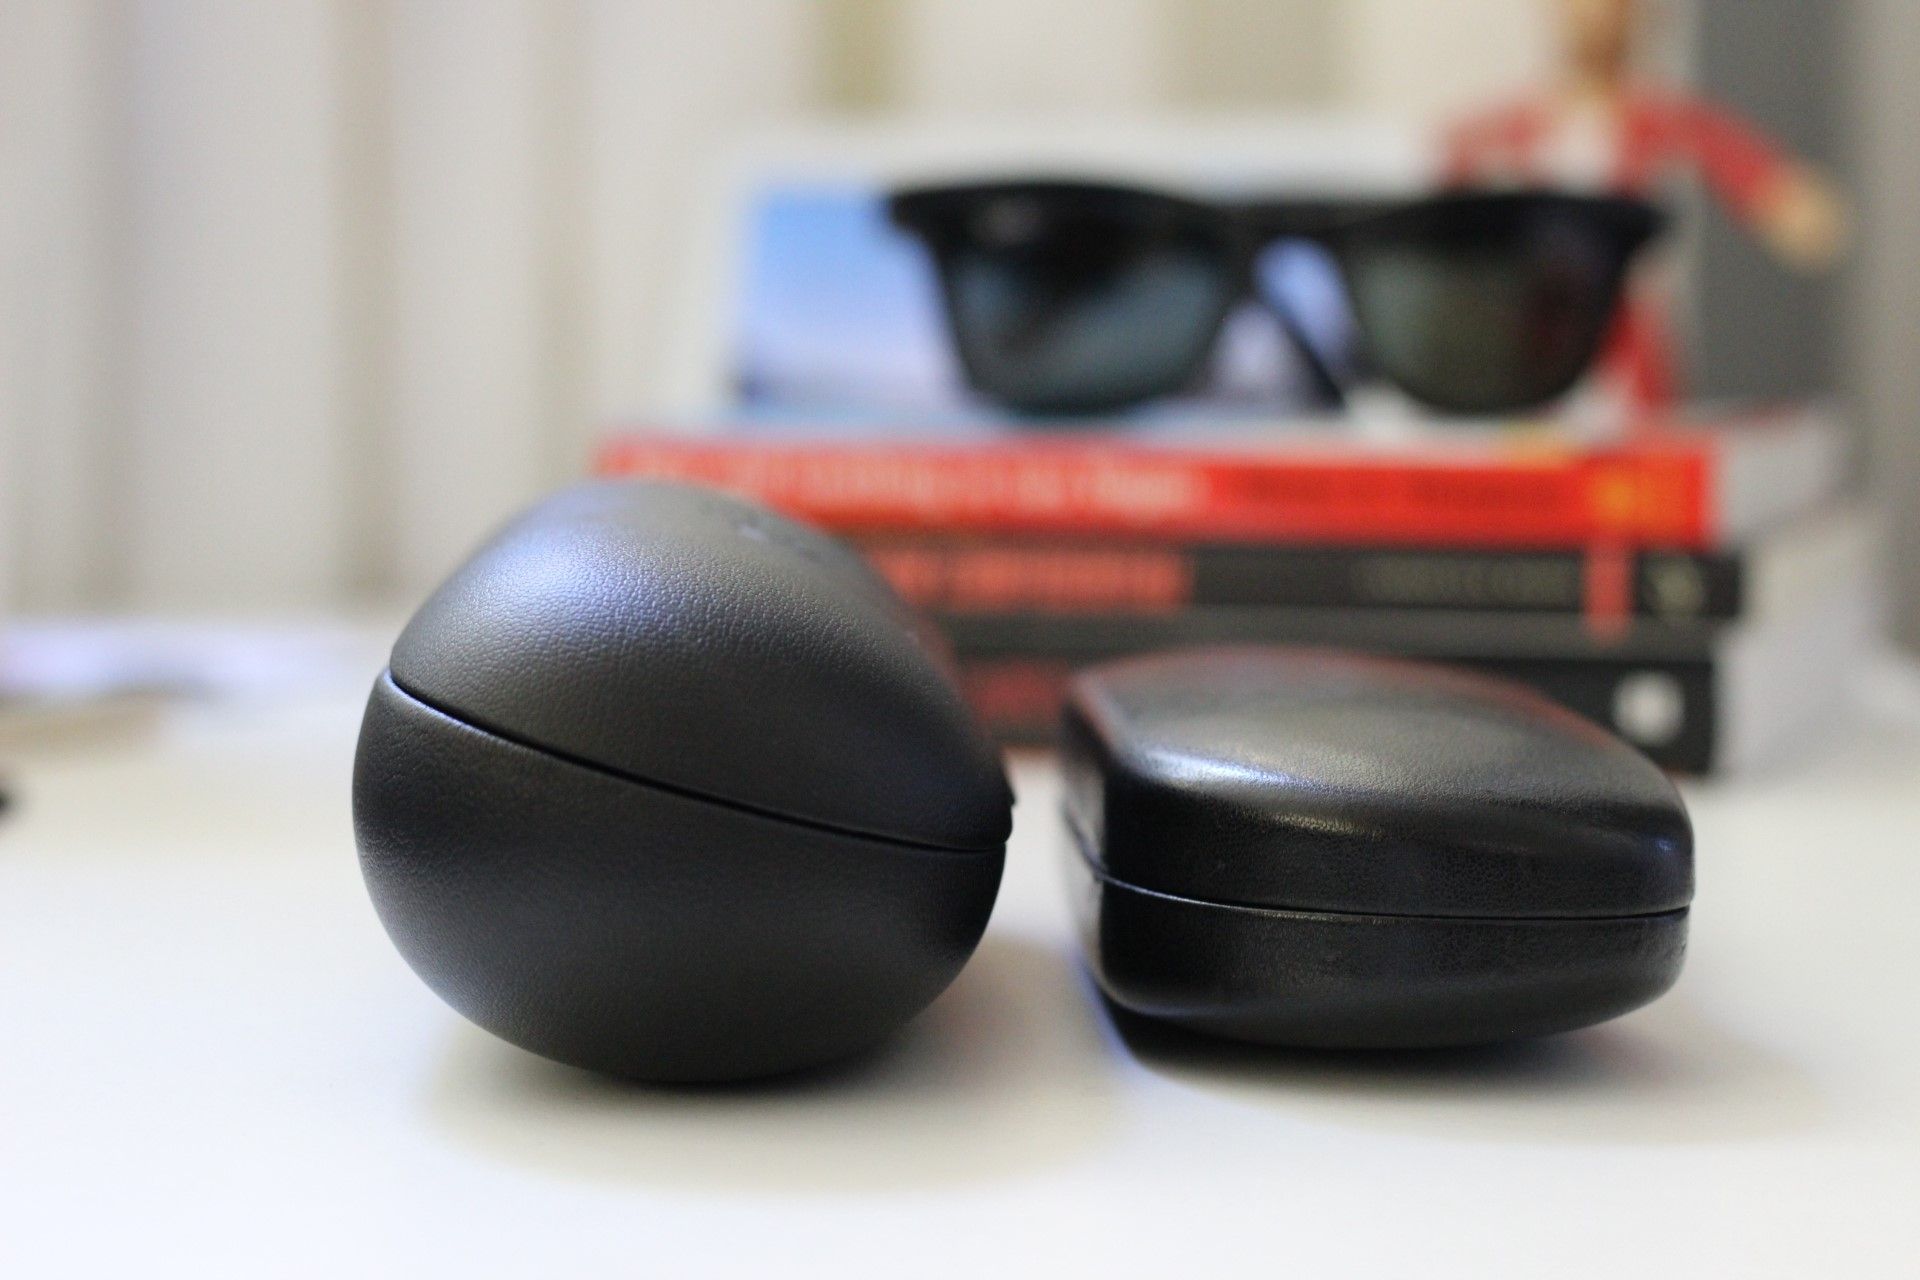 The Ray-Ban Stories case next to a regular glasses case